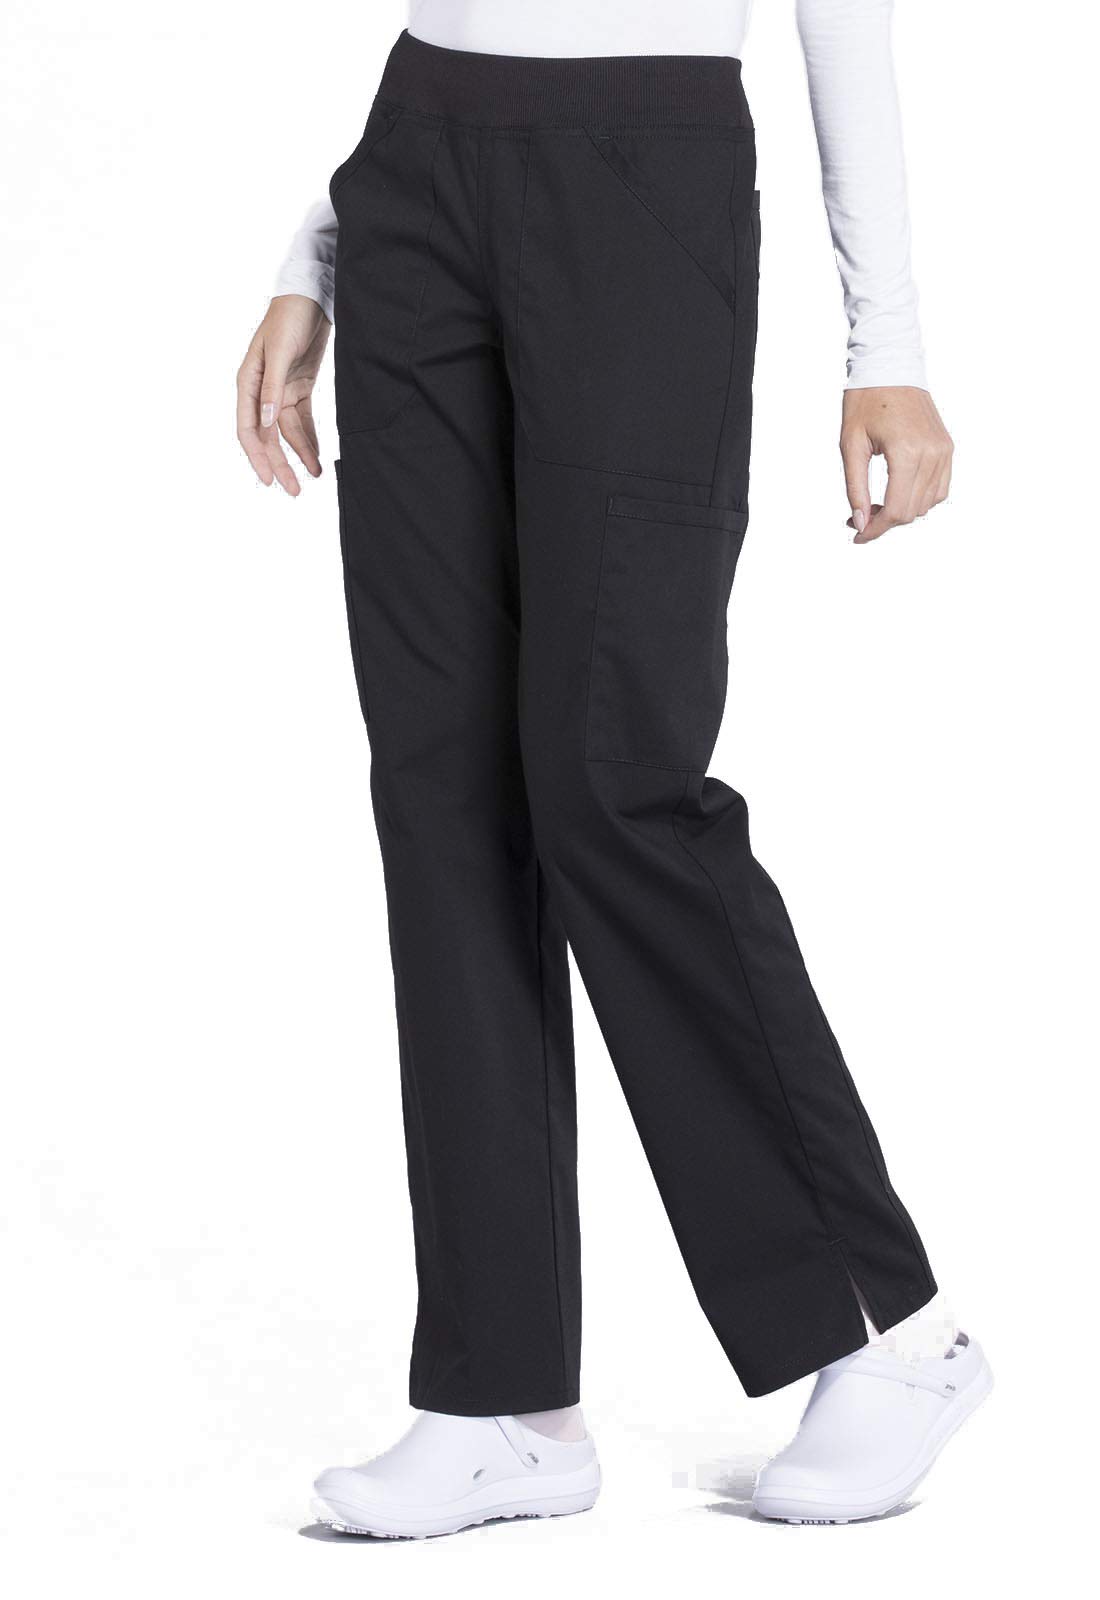 Workwear Professionals Scrubs for Women Pull-On Cargo Pant, Soft Stretch WW170